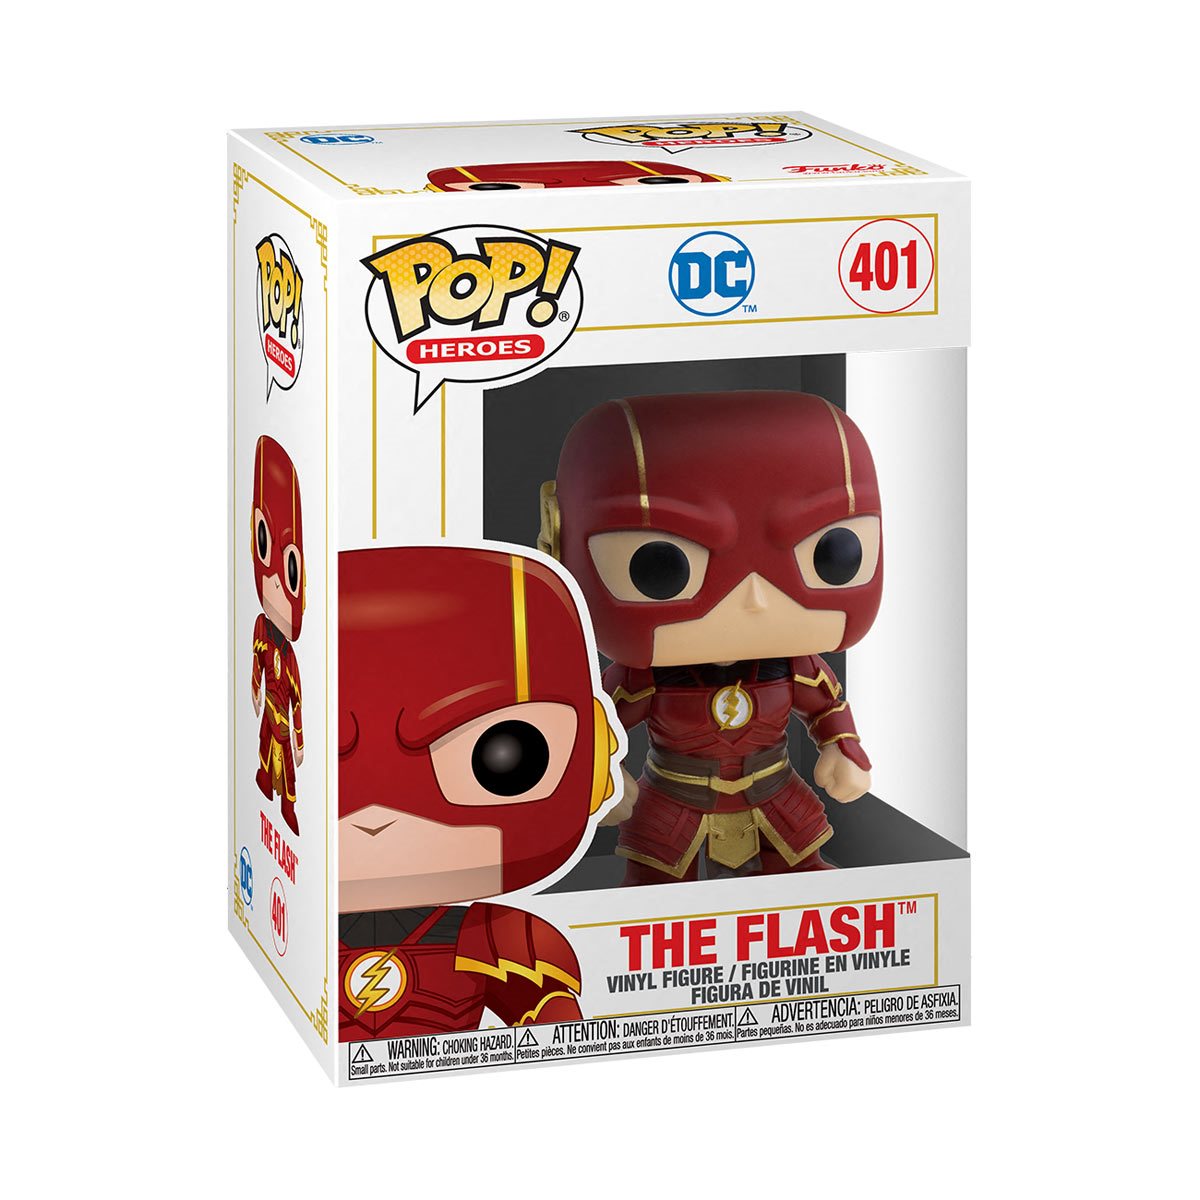 tilskuer Aflede leninismen DC Imperial Palace Funko Pop! The Flash #401 - Collection Lounge